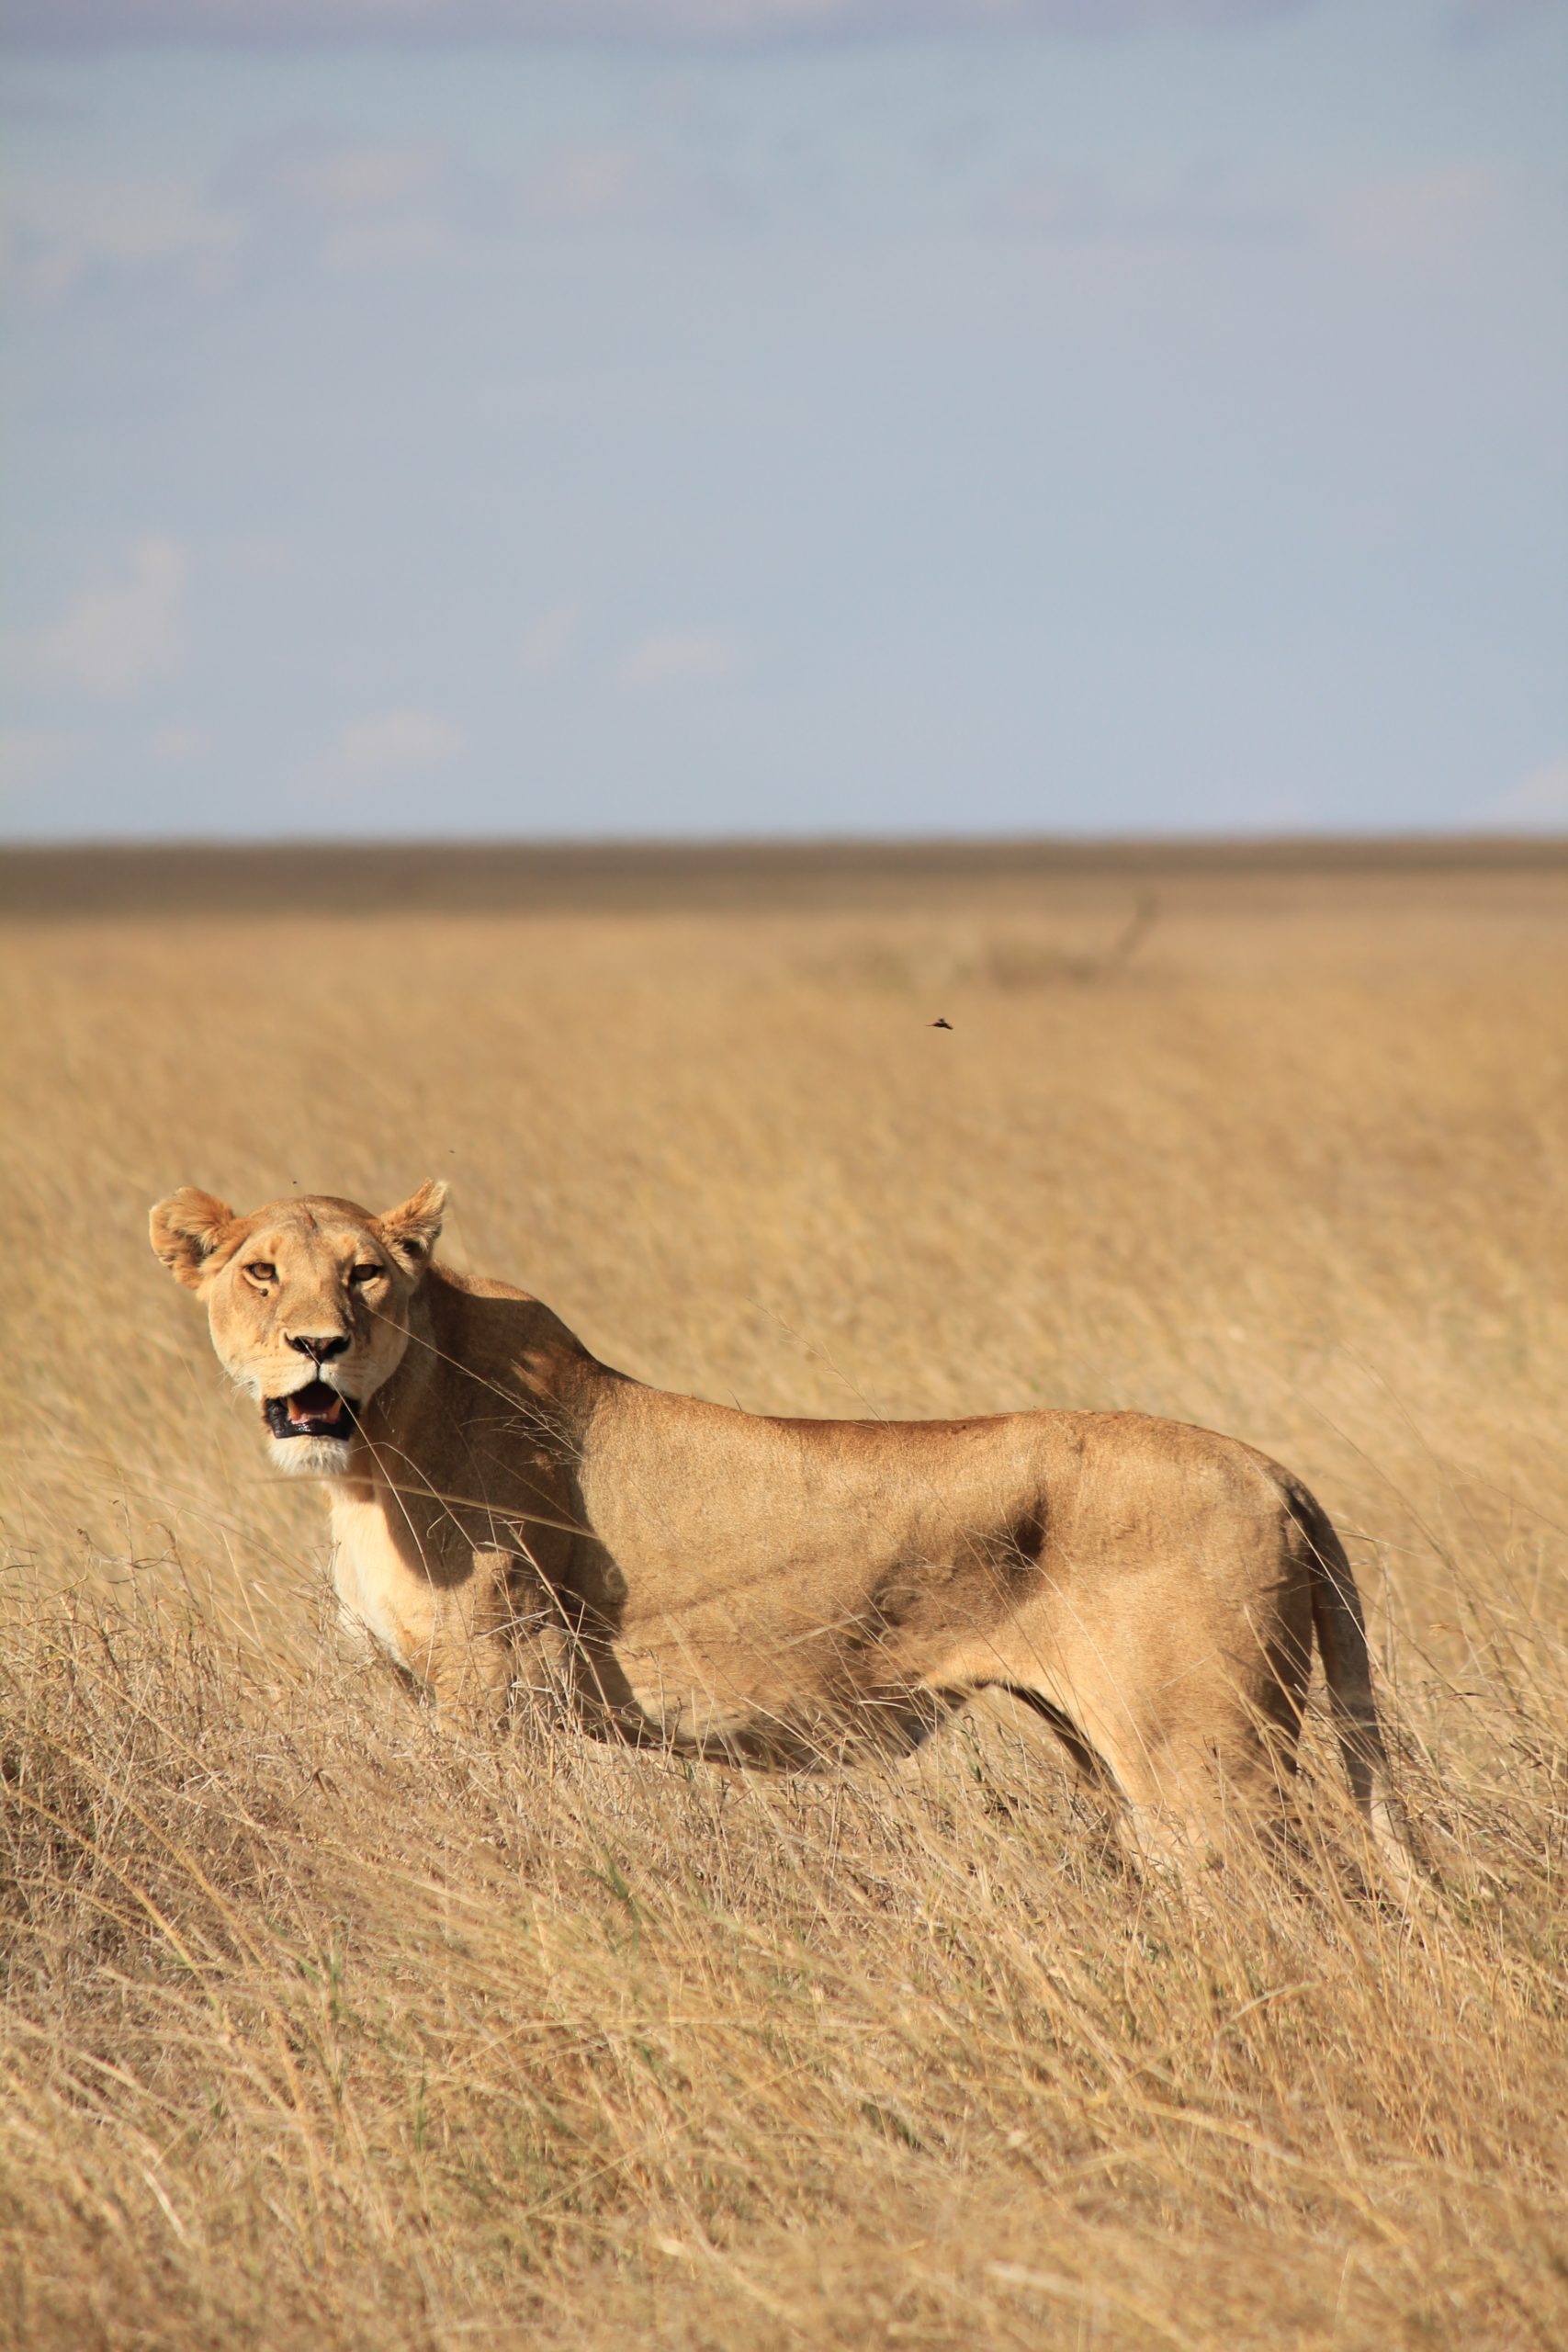 A lion stands in tall golden grass and looks at the camera in Tanzania